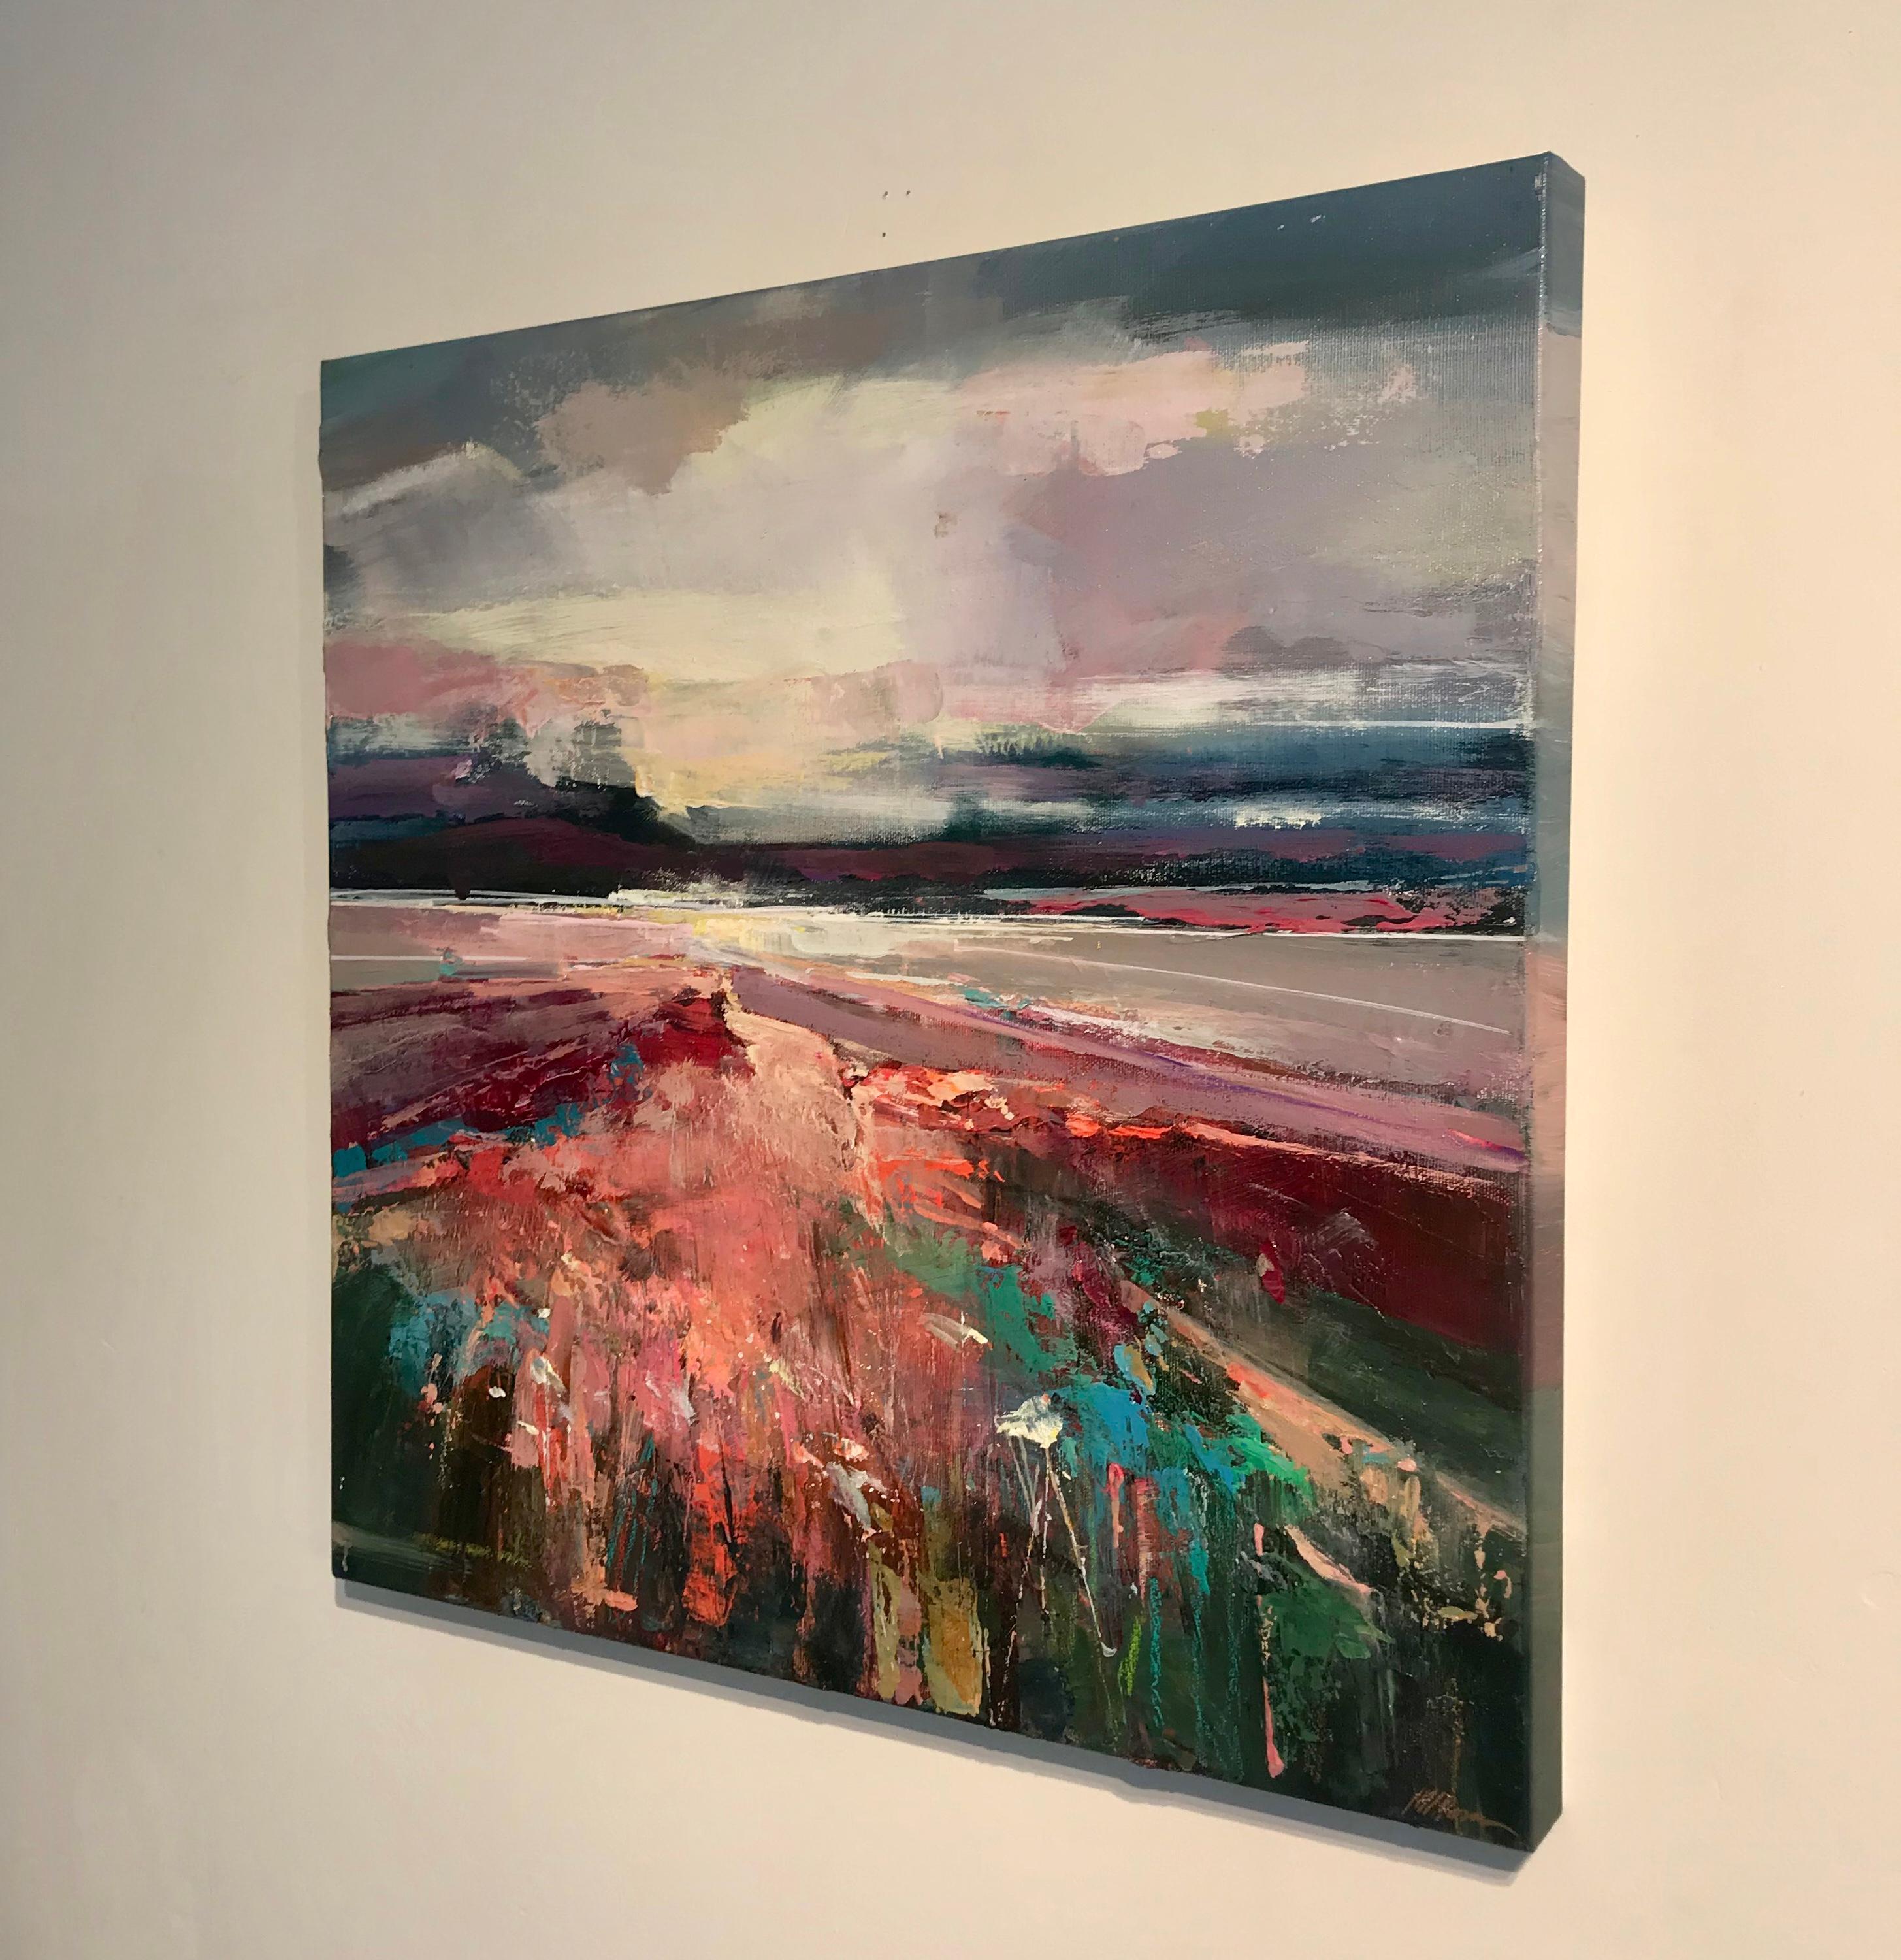 Glowing Skies 3 - original abstract landscape seascape painting-contemporary Art - Abstract Painting by Magdalena Morey